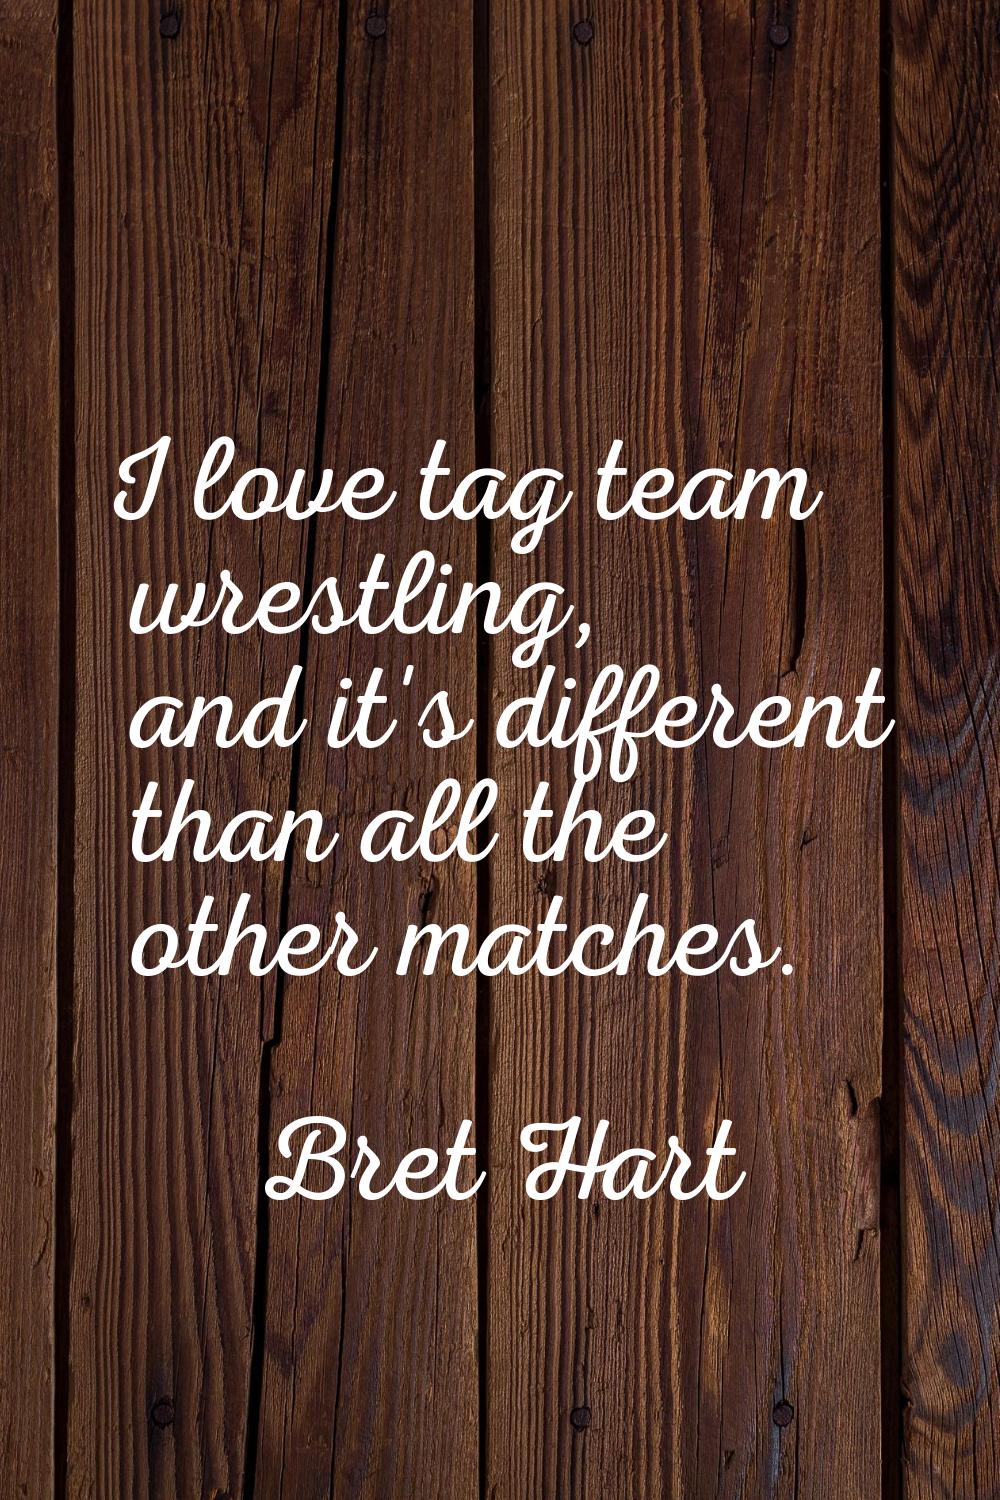 I love tag team wrestling, and it's different than all the other matches.